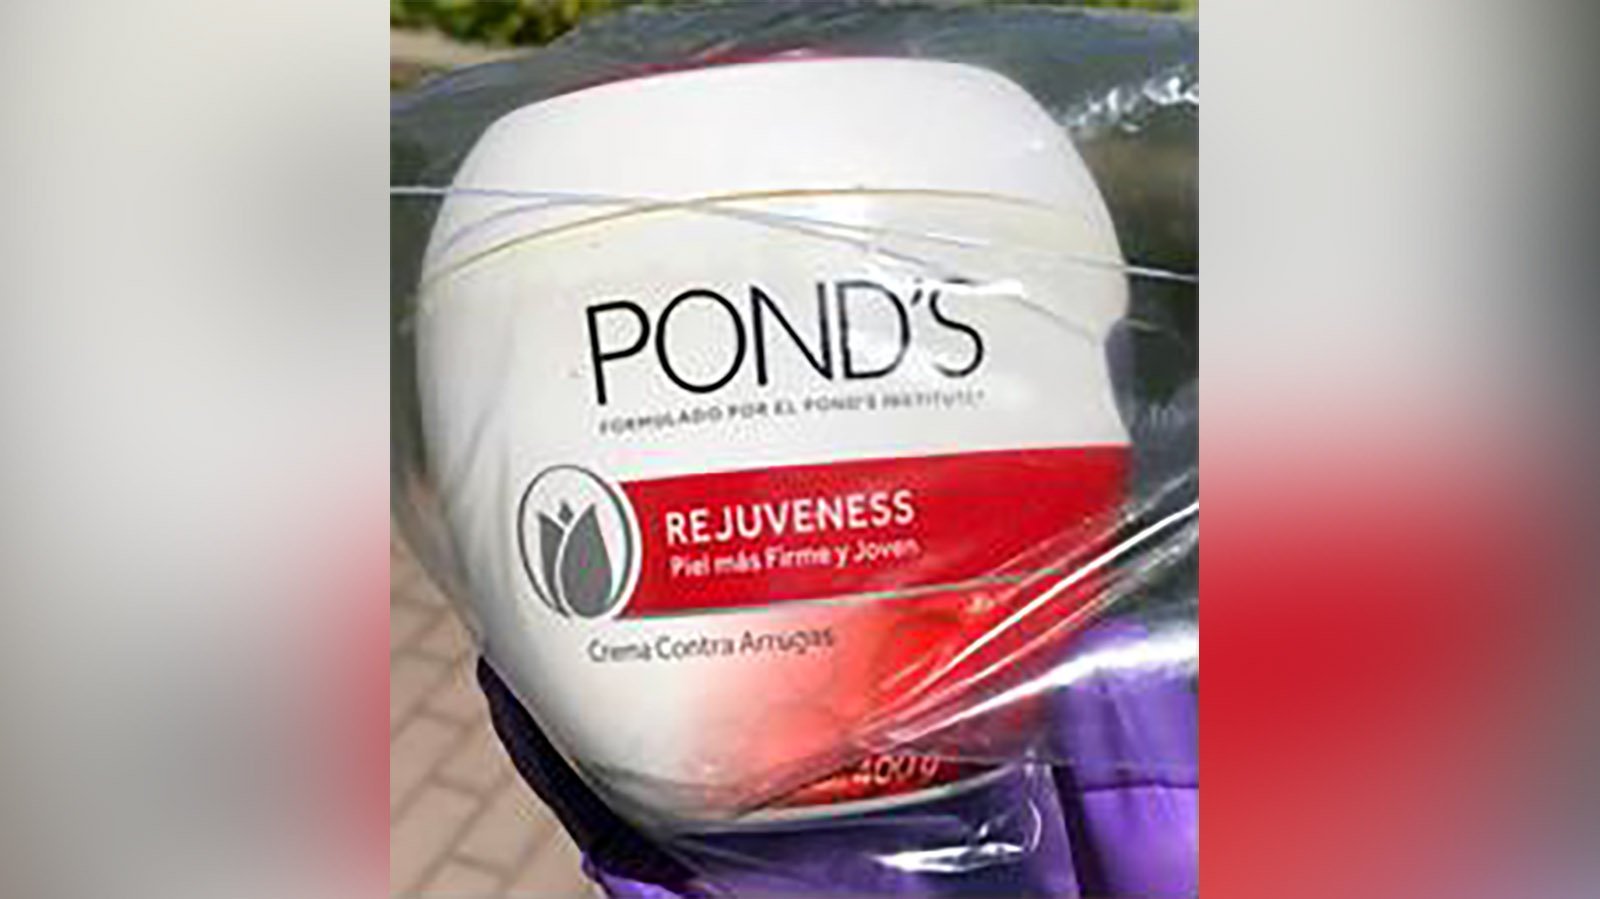 Pond's-labeled skin cream tainted wit methylmercury. (Sacramento County Department of Health Services)